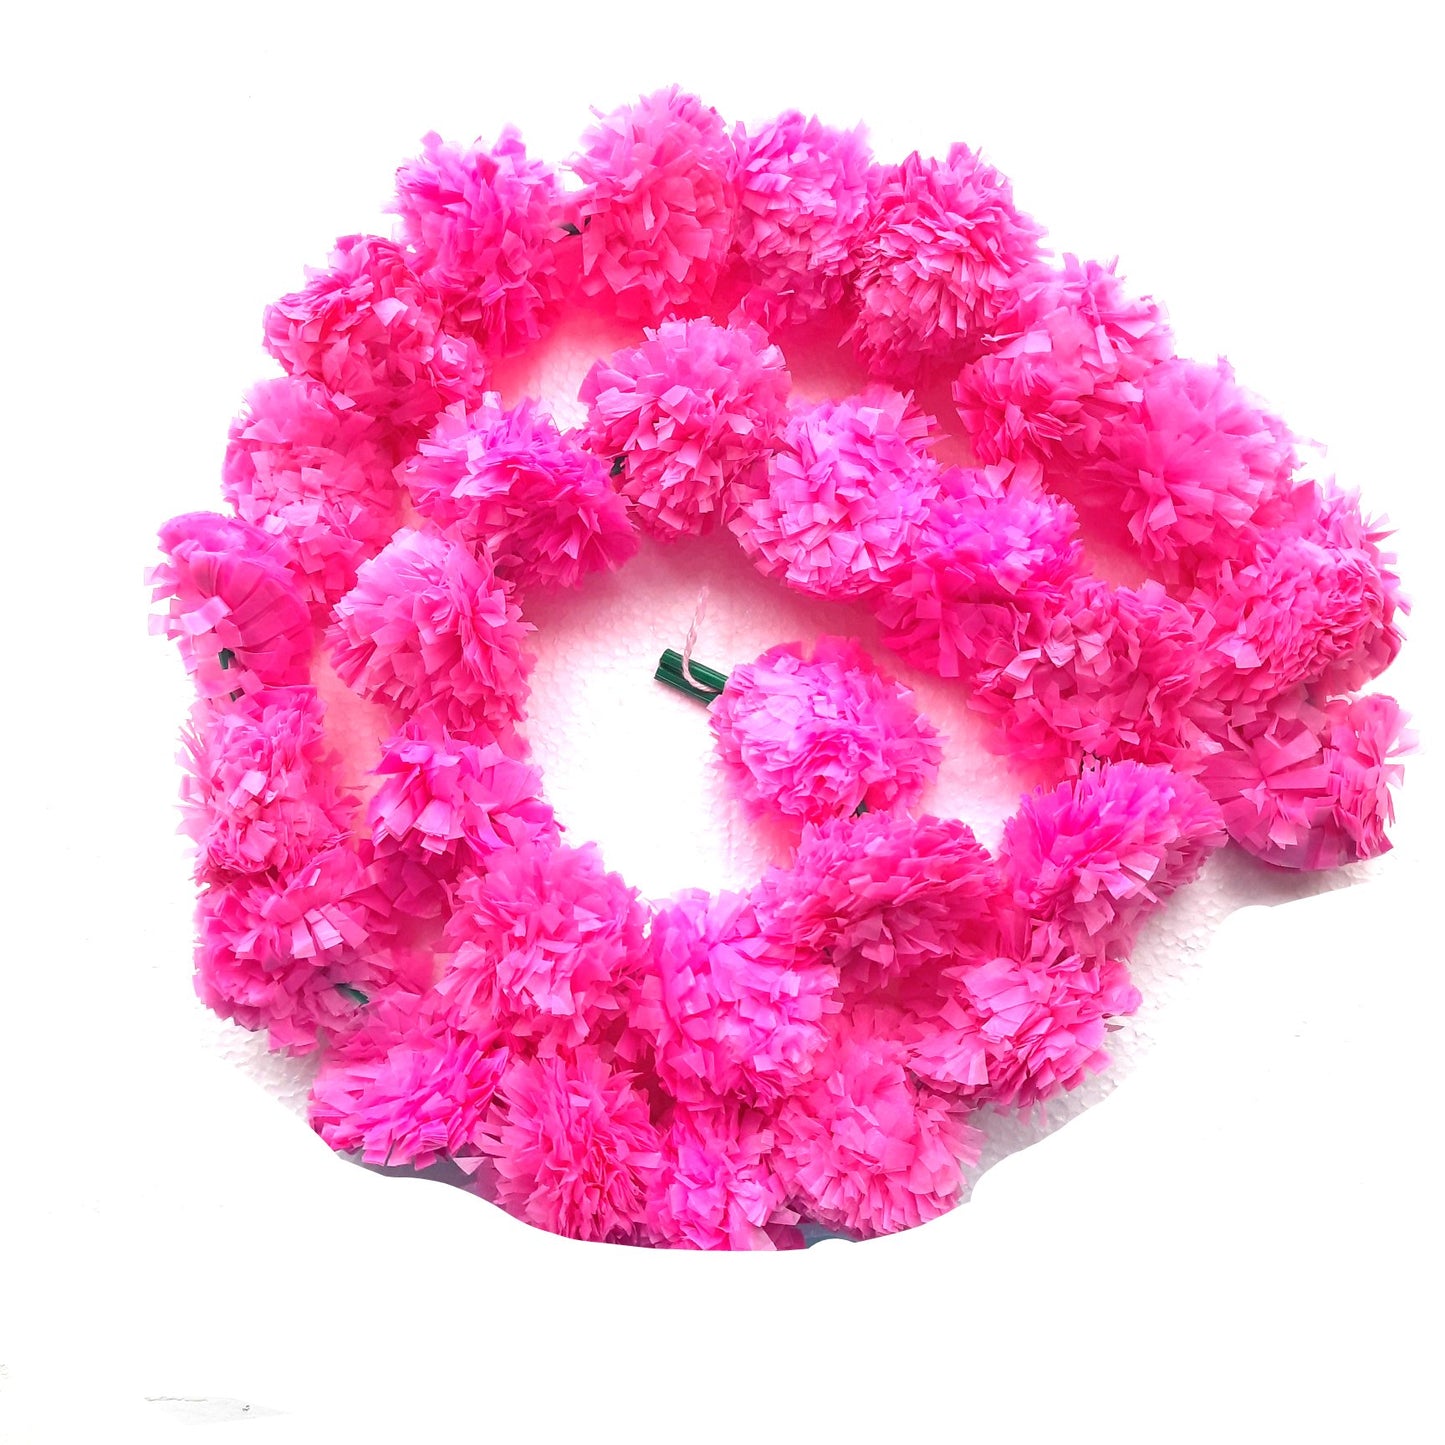 Artificial marigold flower string:  Pink yellow